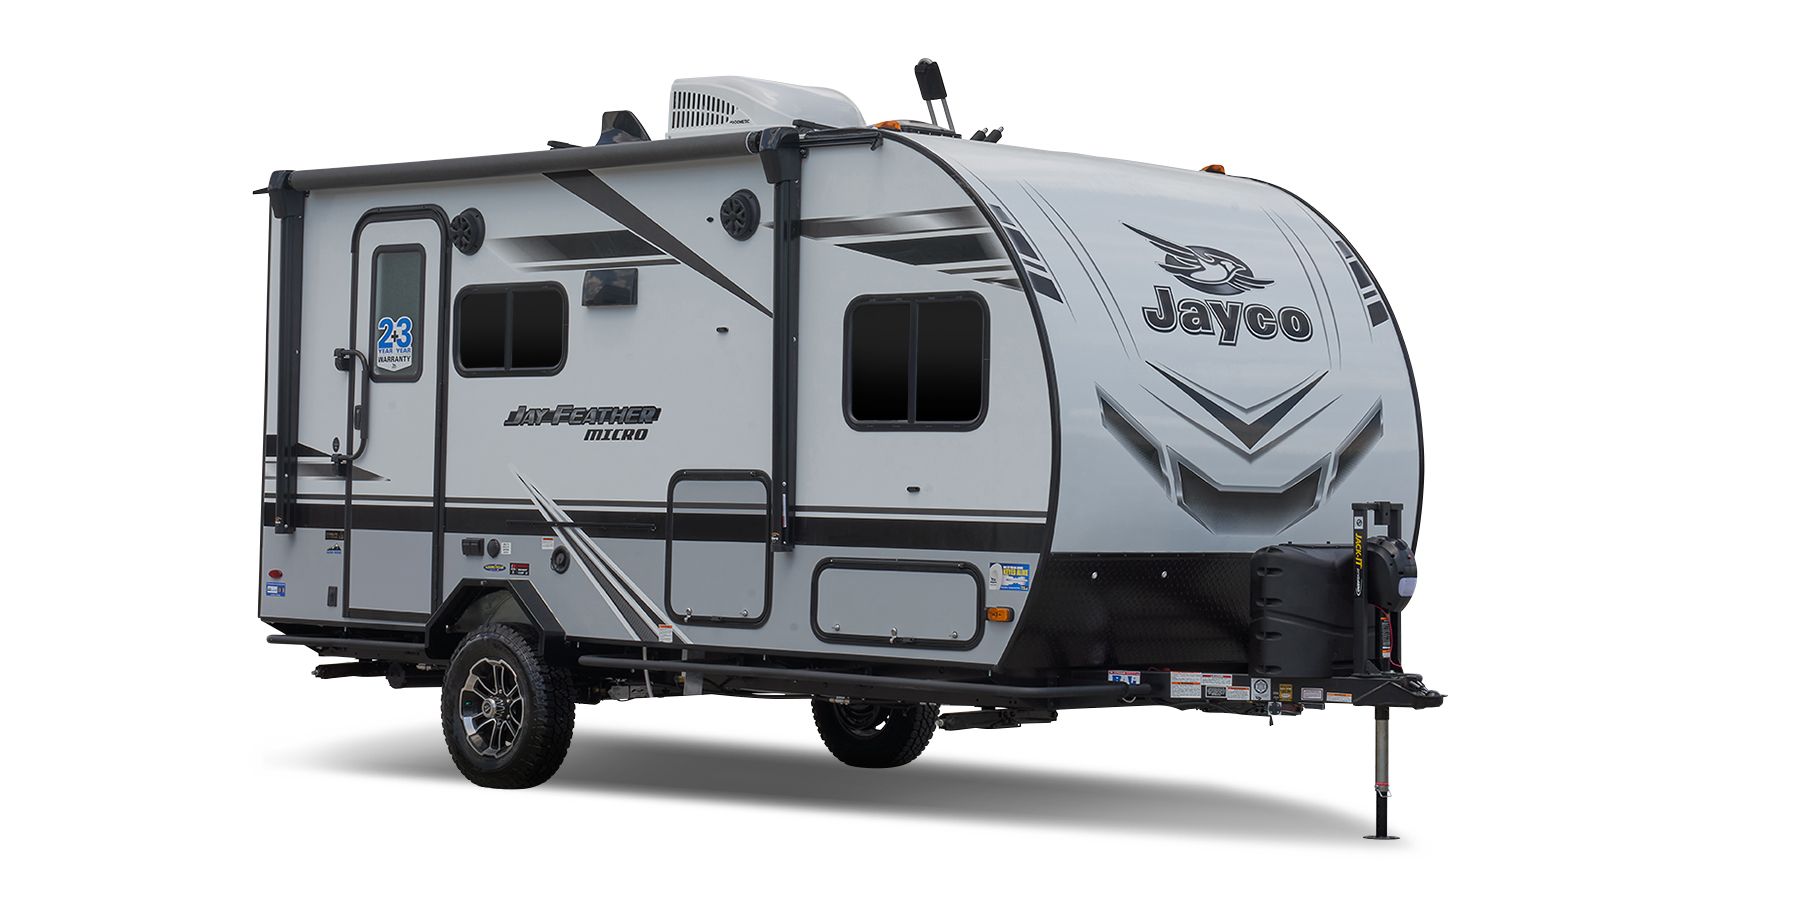 https://www.jayco.com/uploads/rvs/images/6505-Jay%20Feather%20Micro%203-4_gallery_WEB.jpg